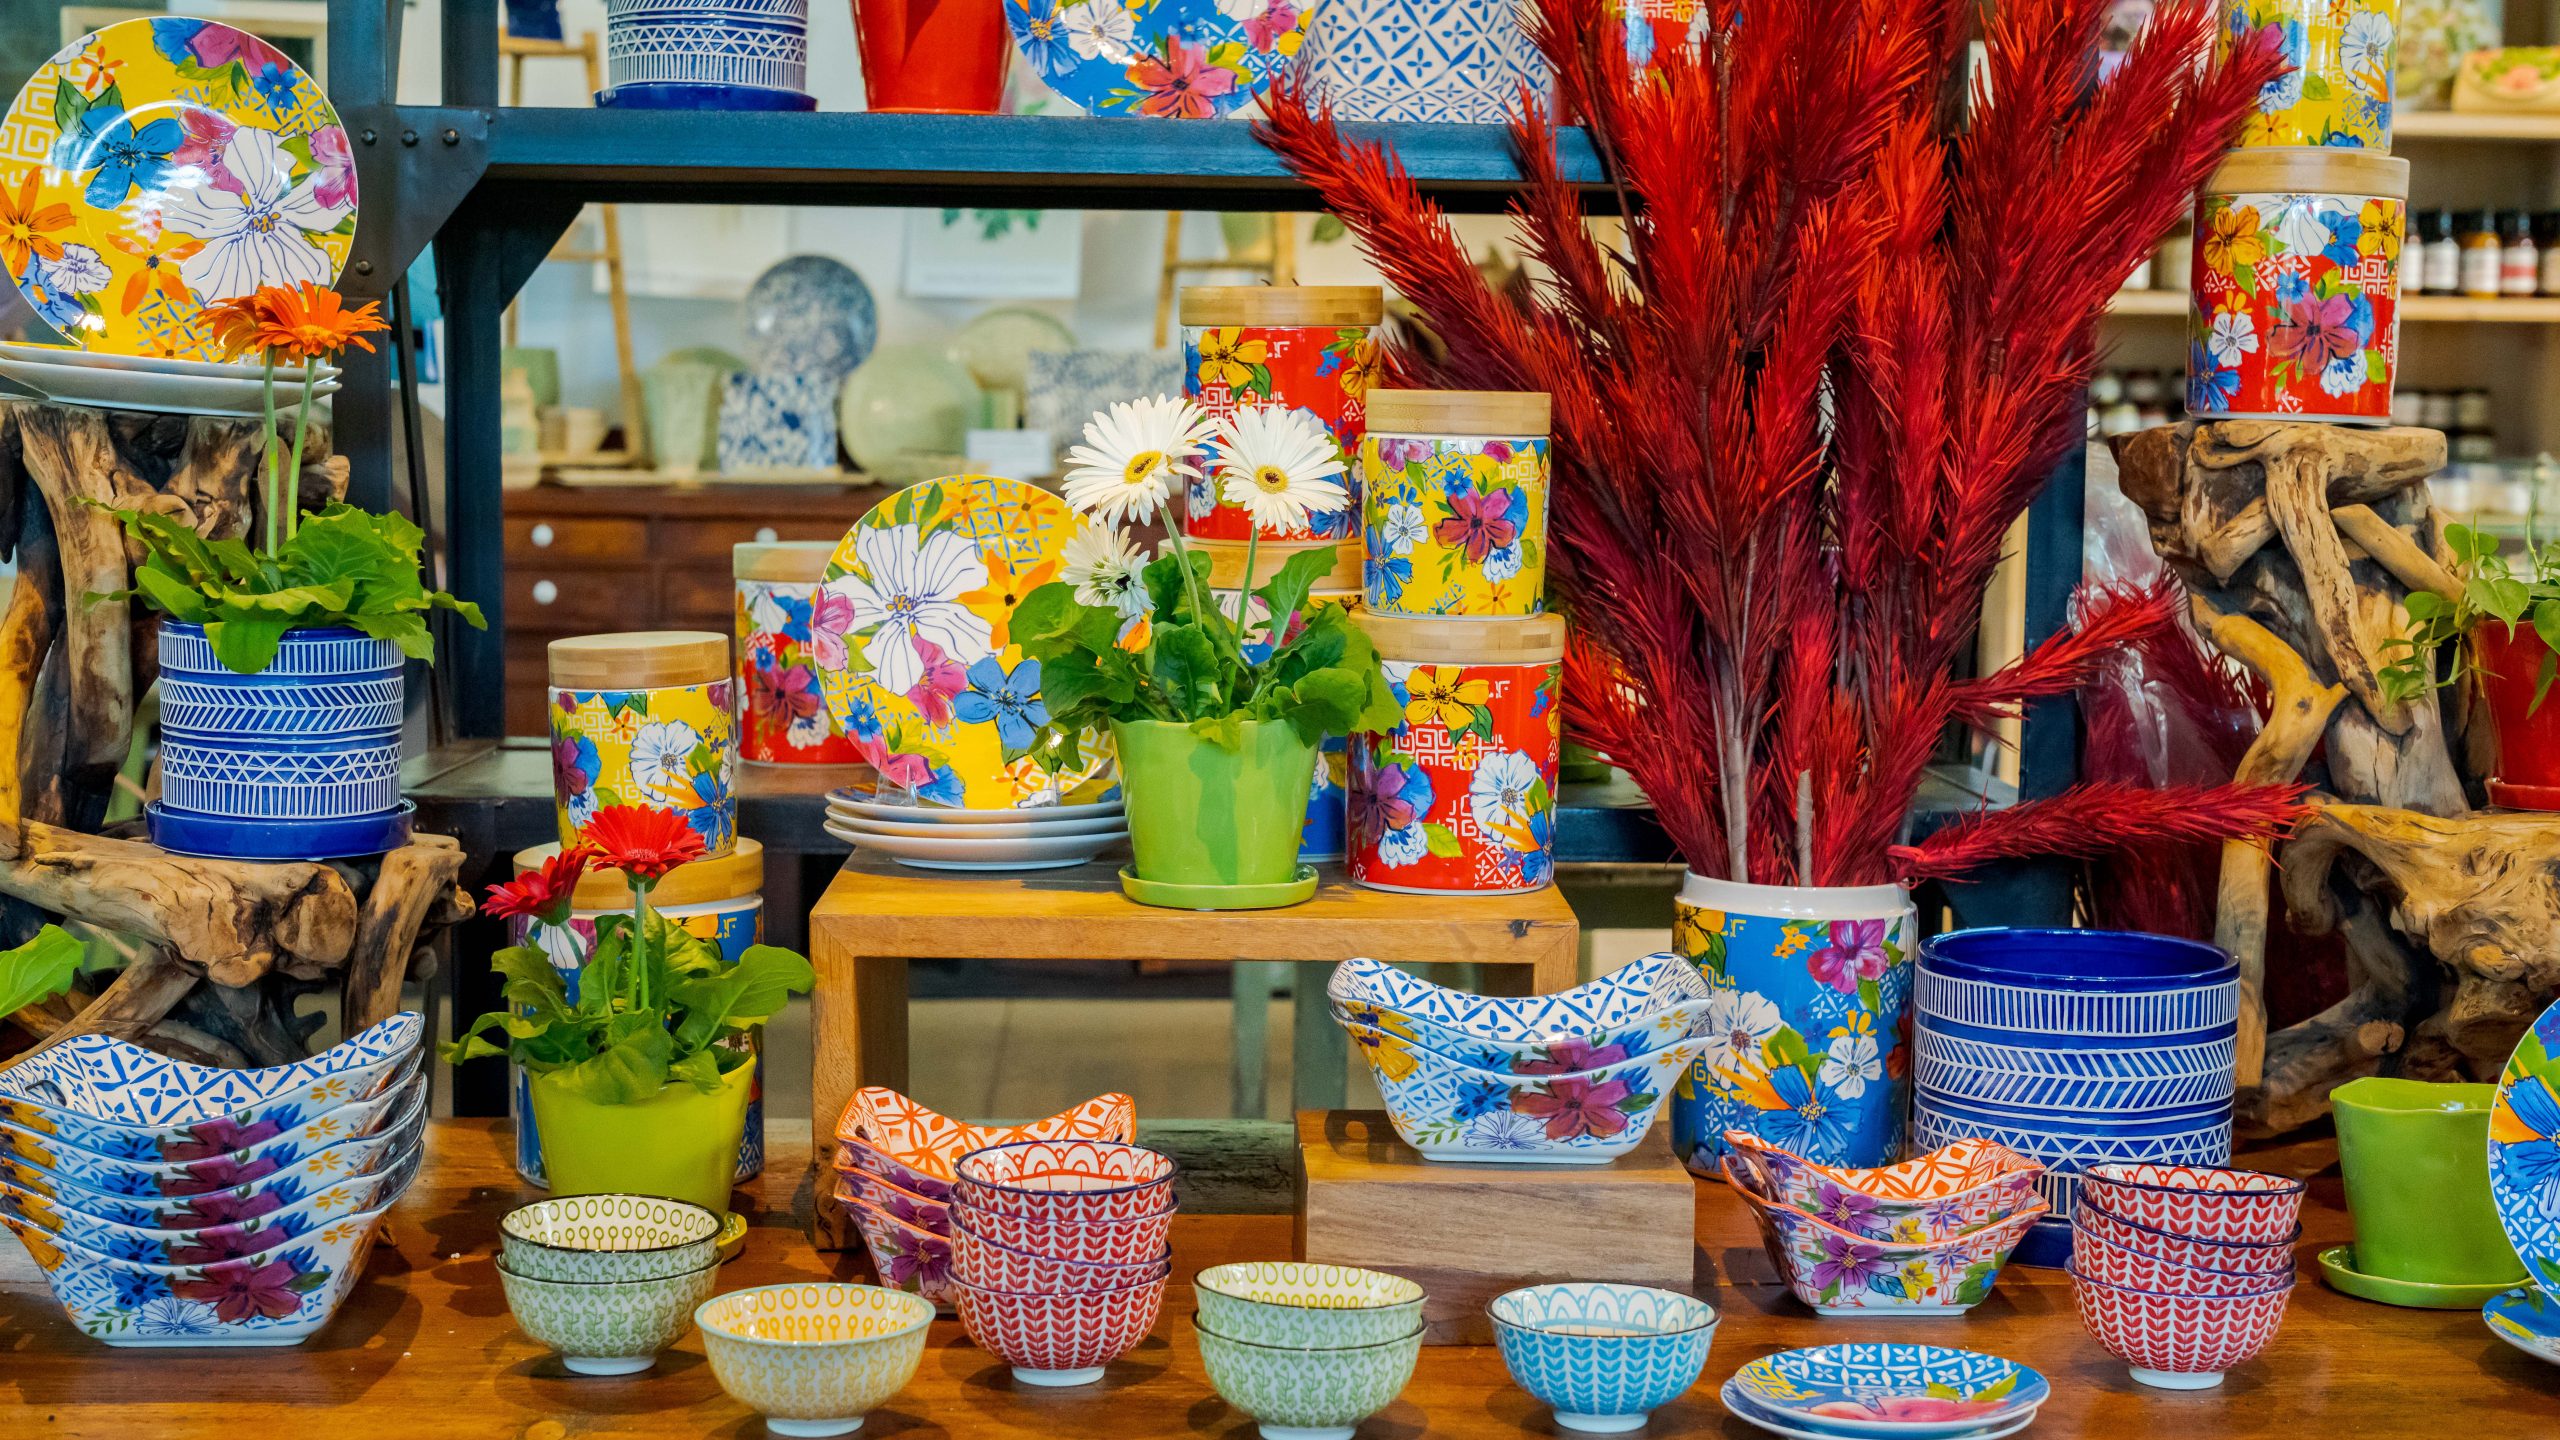 selection of brightly colored floral bowls, plates, and jars in blues, reds and yellows